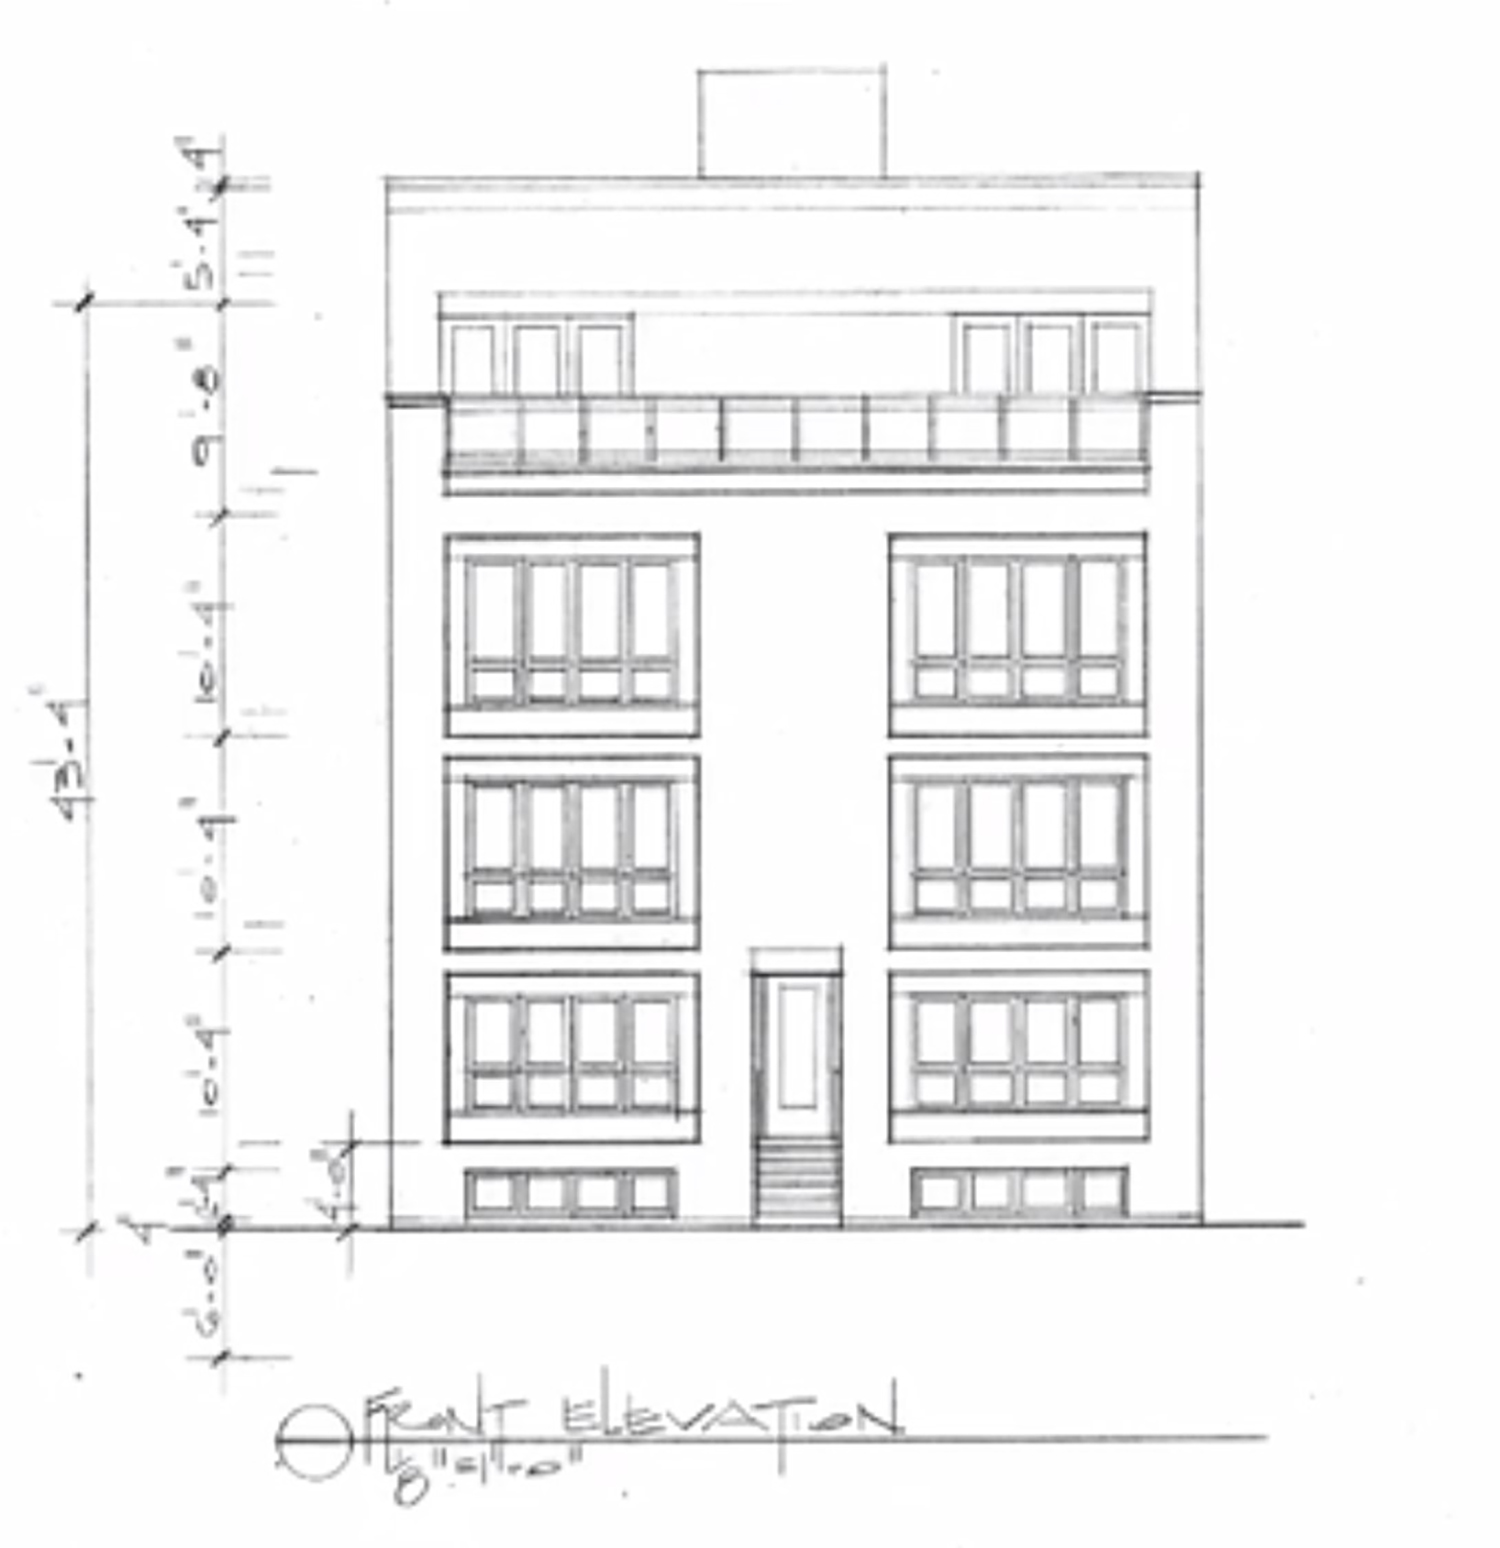 Front Elevation for 719 N Elizabeth Street. Drawing by Hanna Architects